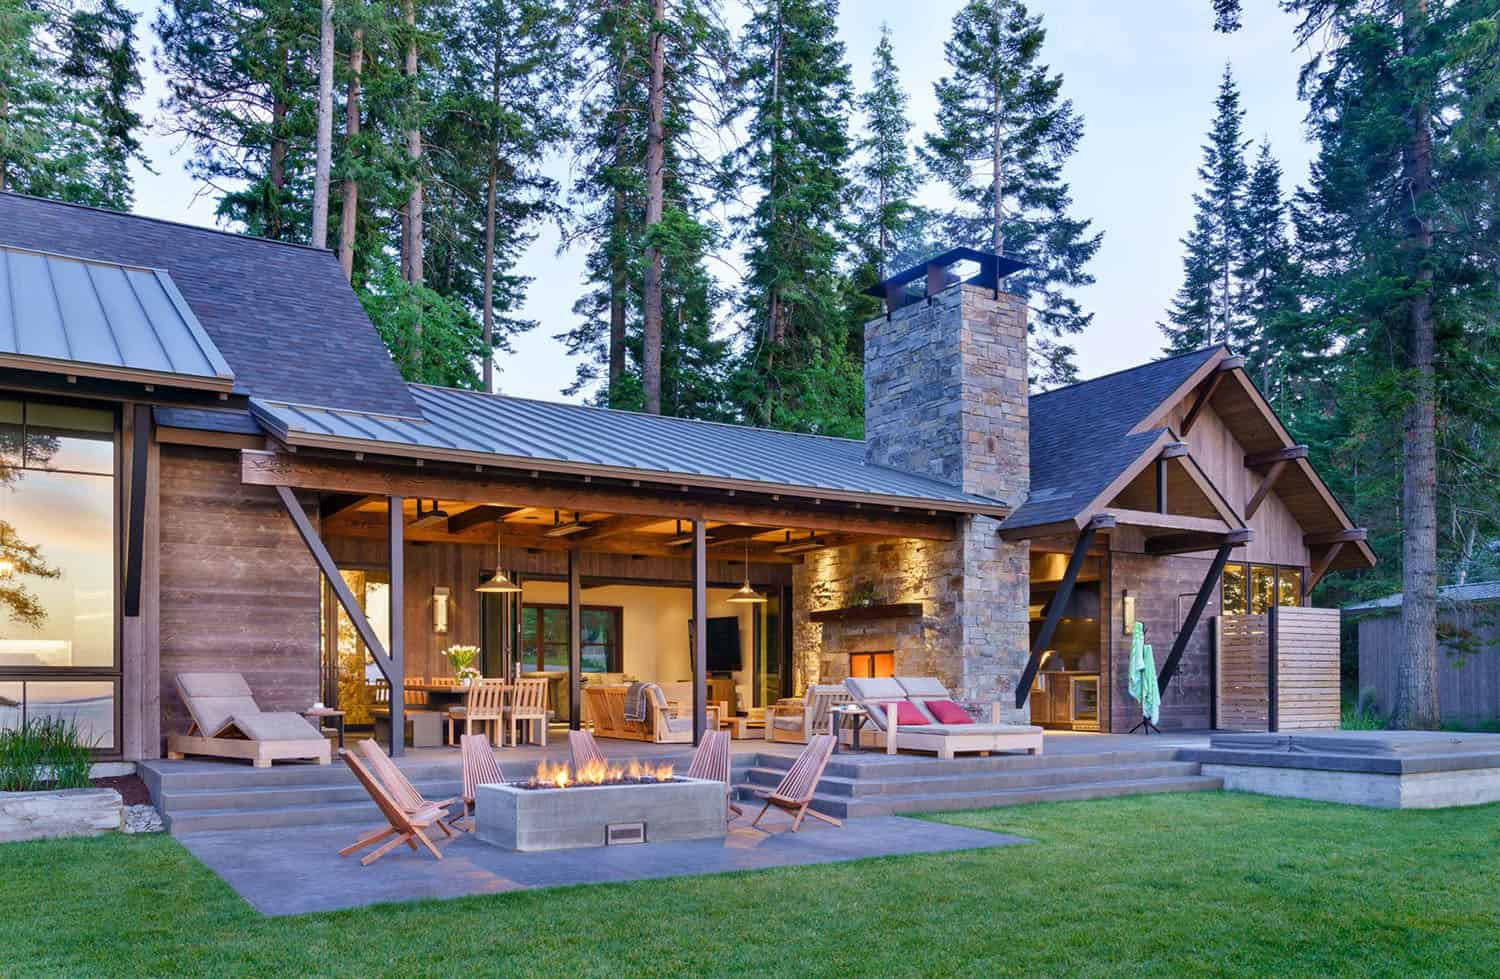 Lake house getaway in harmony with its woodland setting in Montana